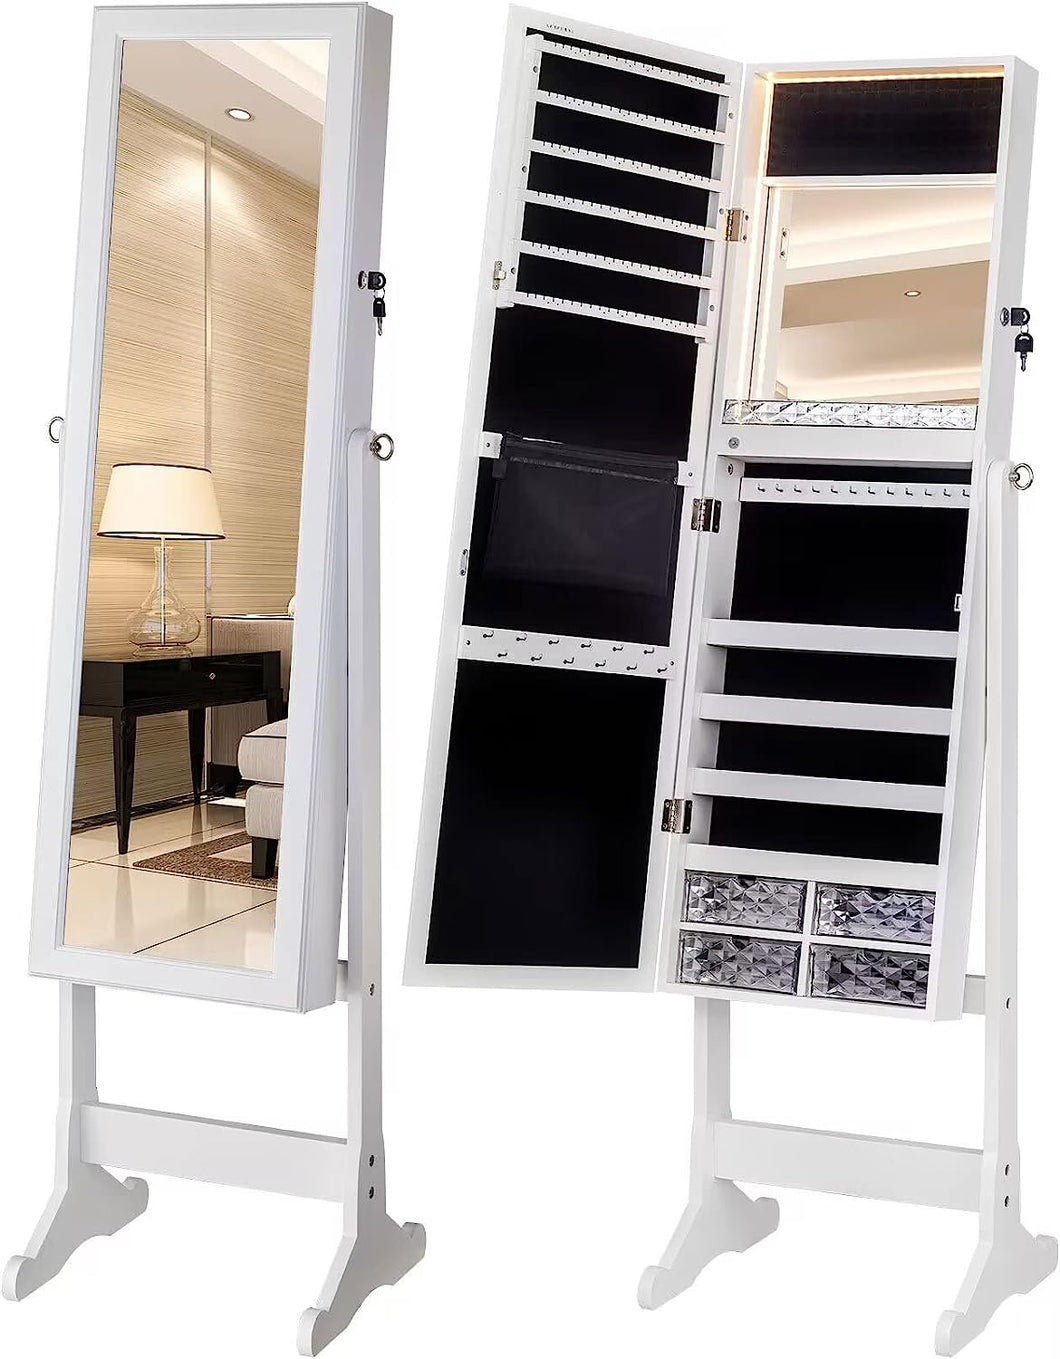 LED Light Jewelry Cabinet Armoire, Standing Mirror Makeup Lockable Large Storage Organizer W/Drawers (White)